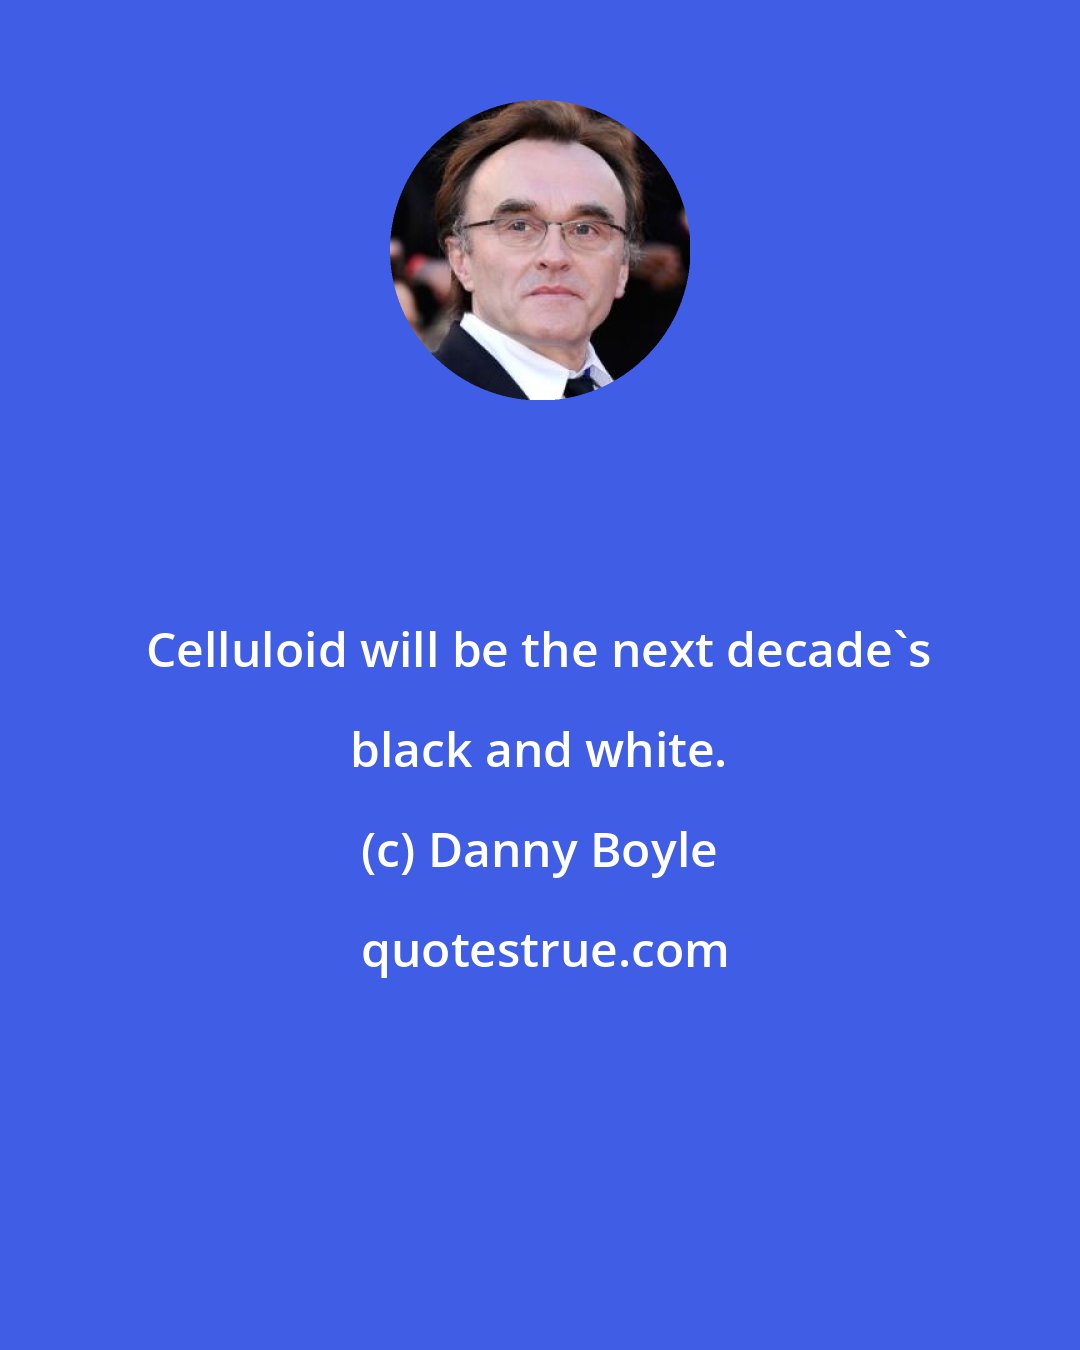 Danny Boyle: Celluloid will be the next decade's black and white.